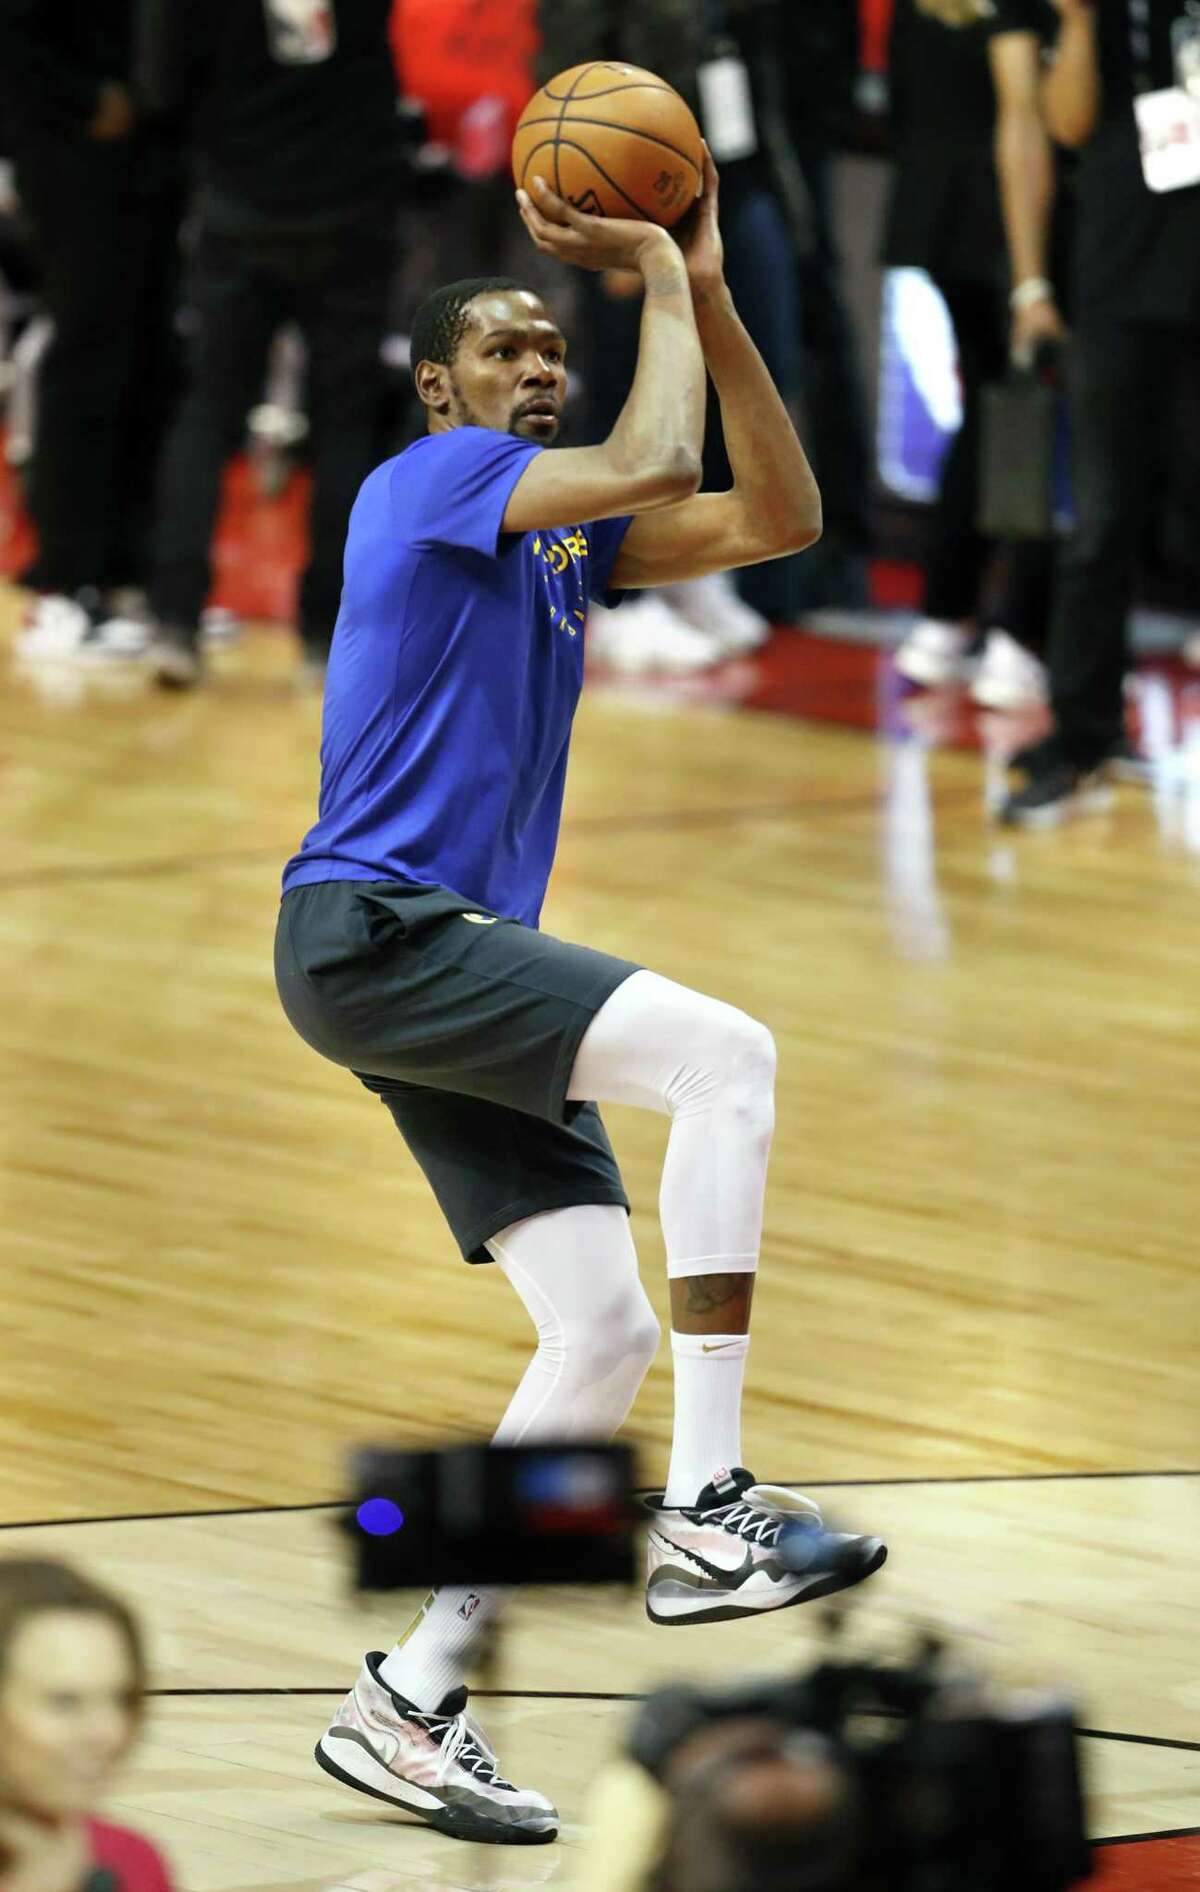 Golden State Warriors' Kevin Durant warms up before playing against Toronto Raptors in NBA Finals' Game 5 at Scotiabank Arena in Toronto, Ontario, on Monday, June 10, 2019.